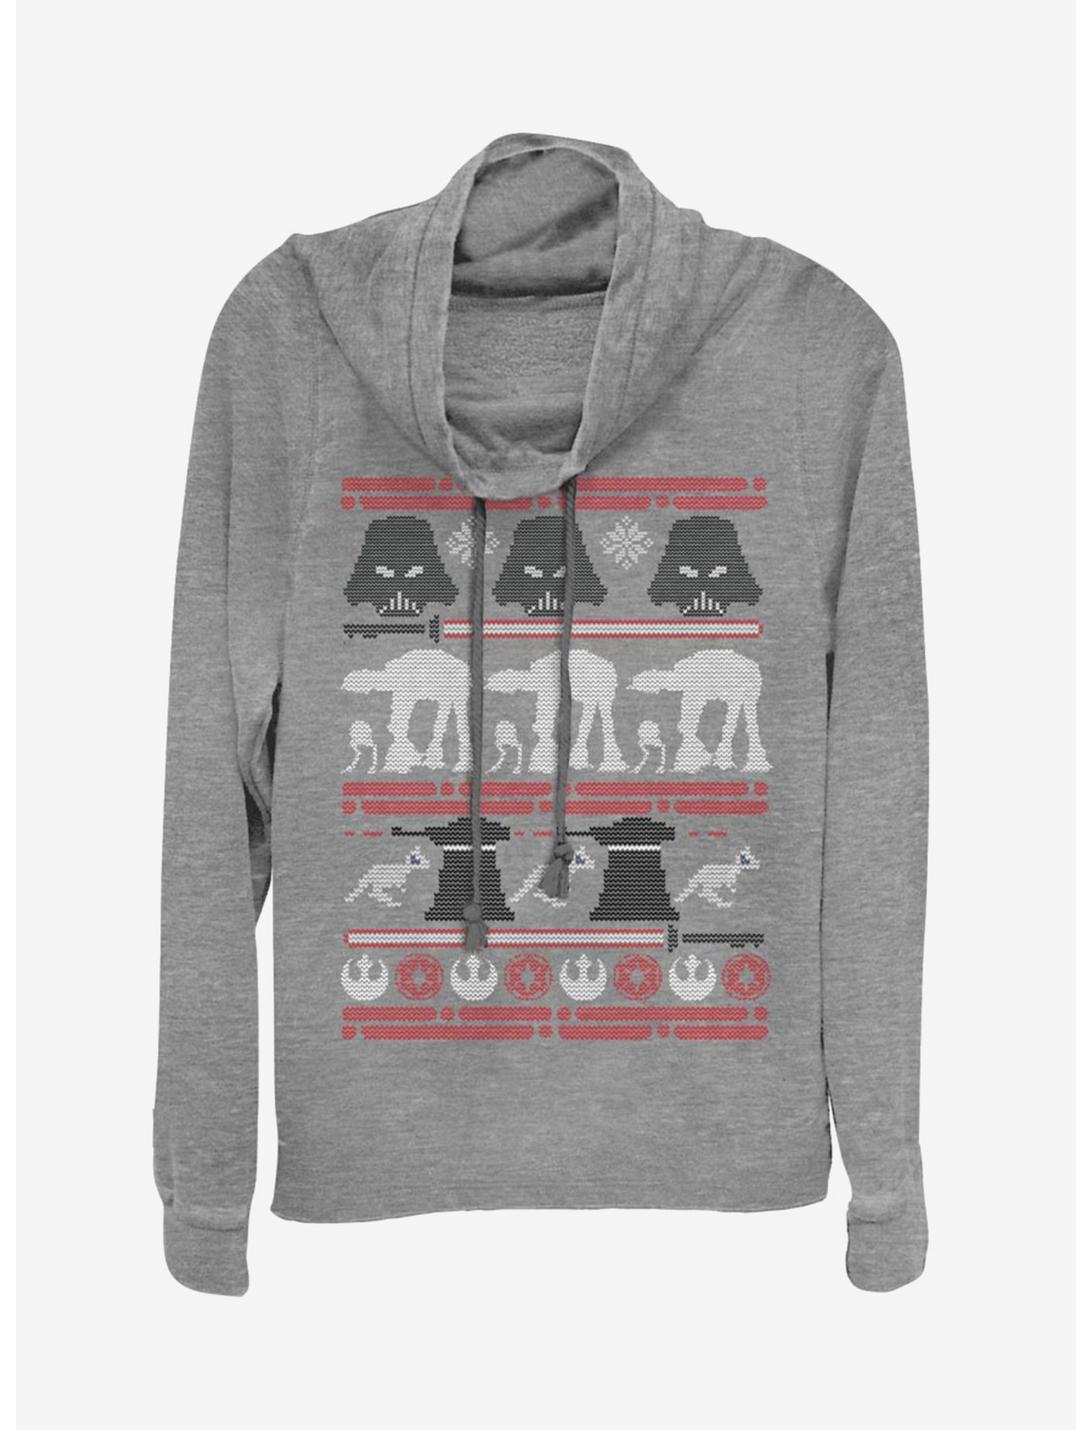 Star Wars Hoth Battle Christmas Pattern Cowlneck Long-Sleeve Womens Top, GRAY HTR, hi-res